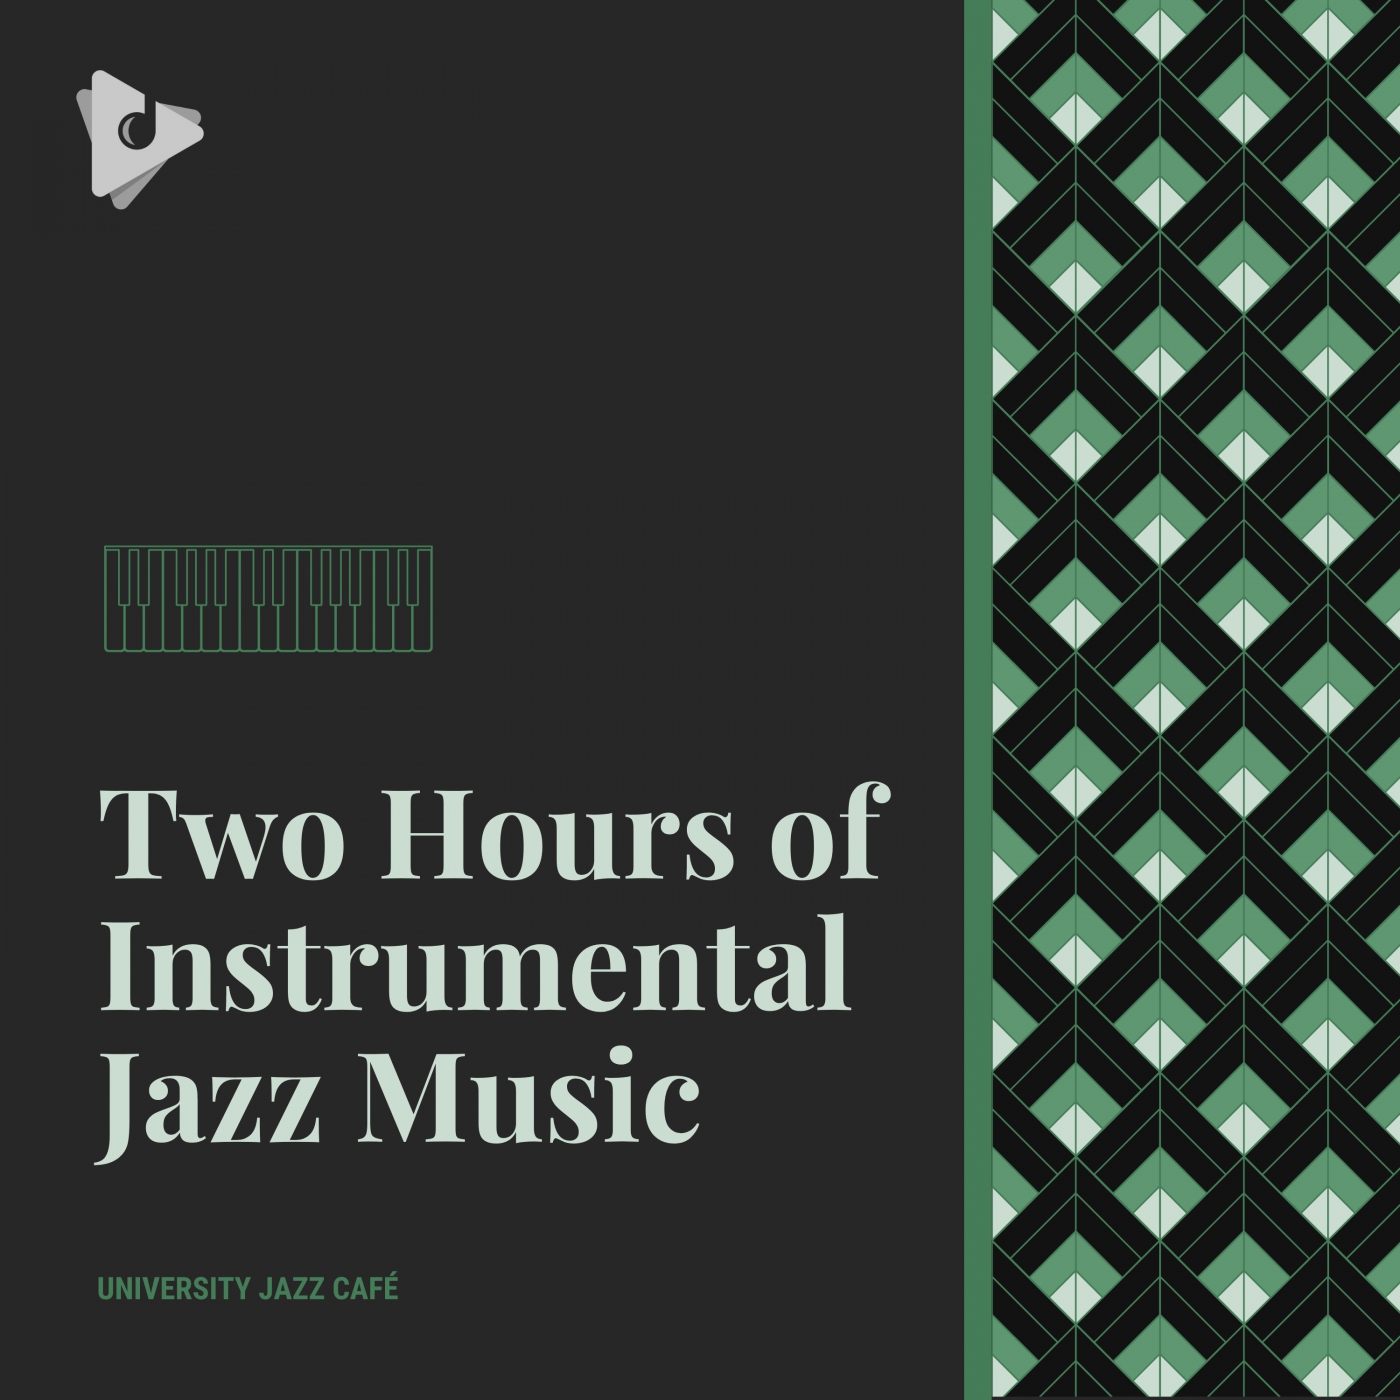 Two Hours of Instrumental Jazz Music